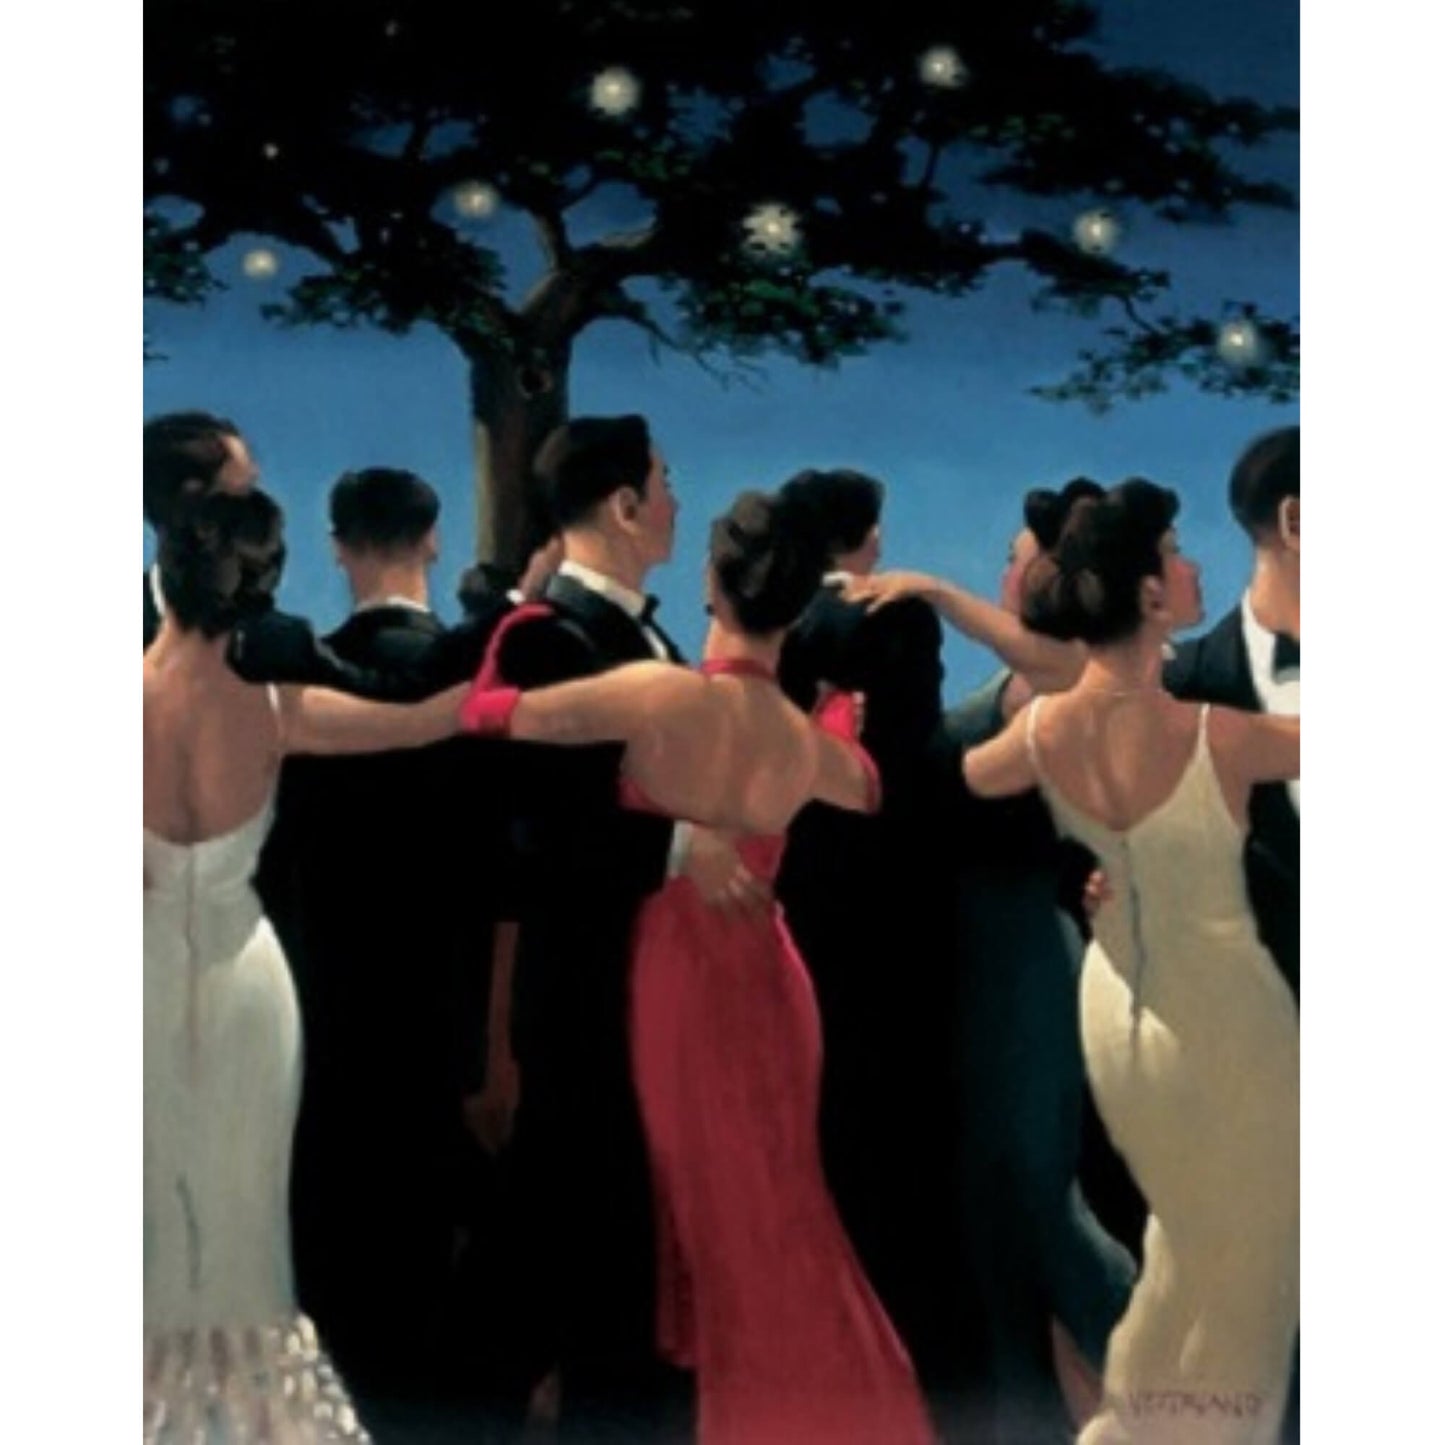 Load image into Gallery viewer, Waltzers Limited Edition Print Jack Vettriano
